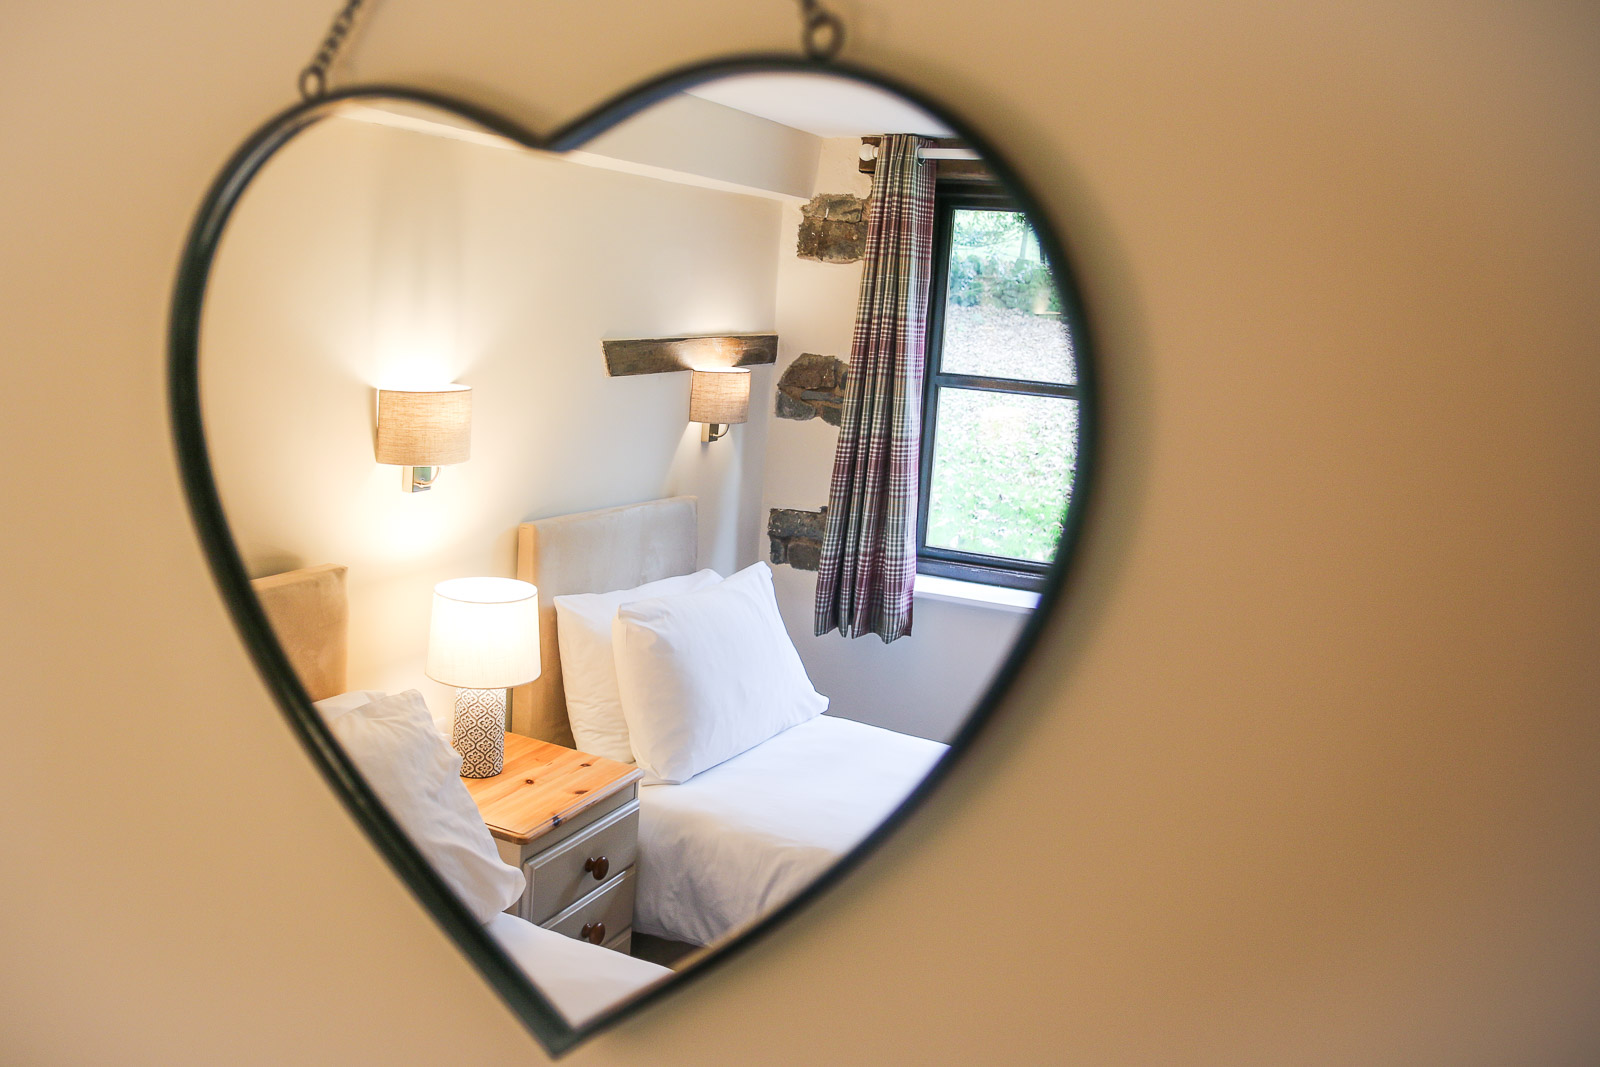 A heart-shaped mirror with a bedroom in the reflection.